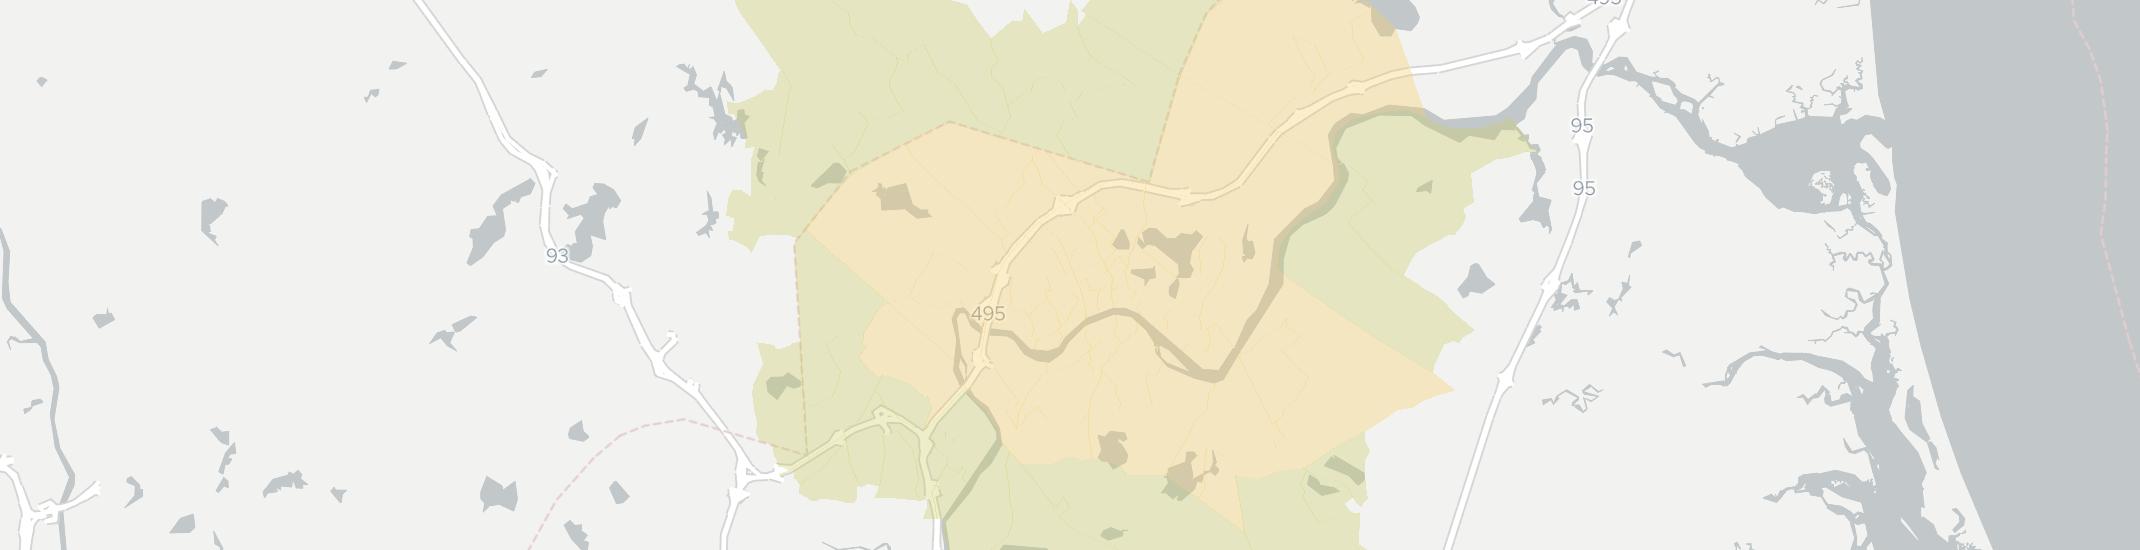 Haverhill Internet Competition Map. Click for interactive map.